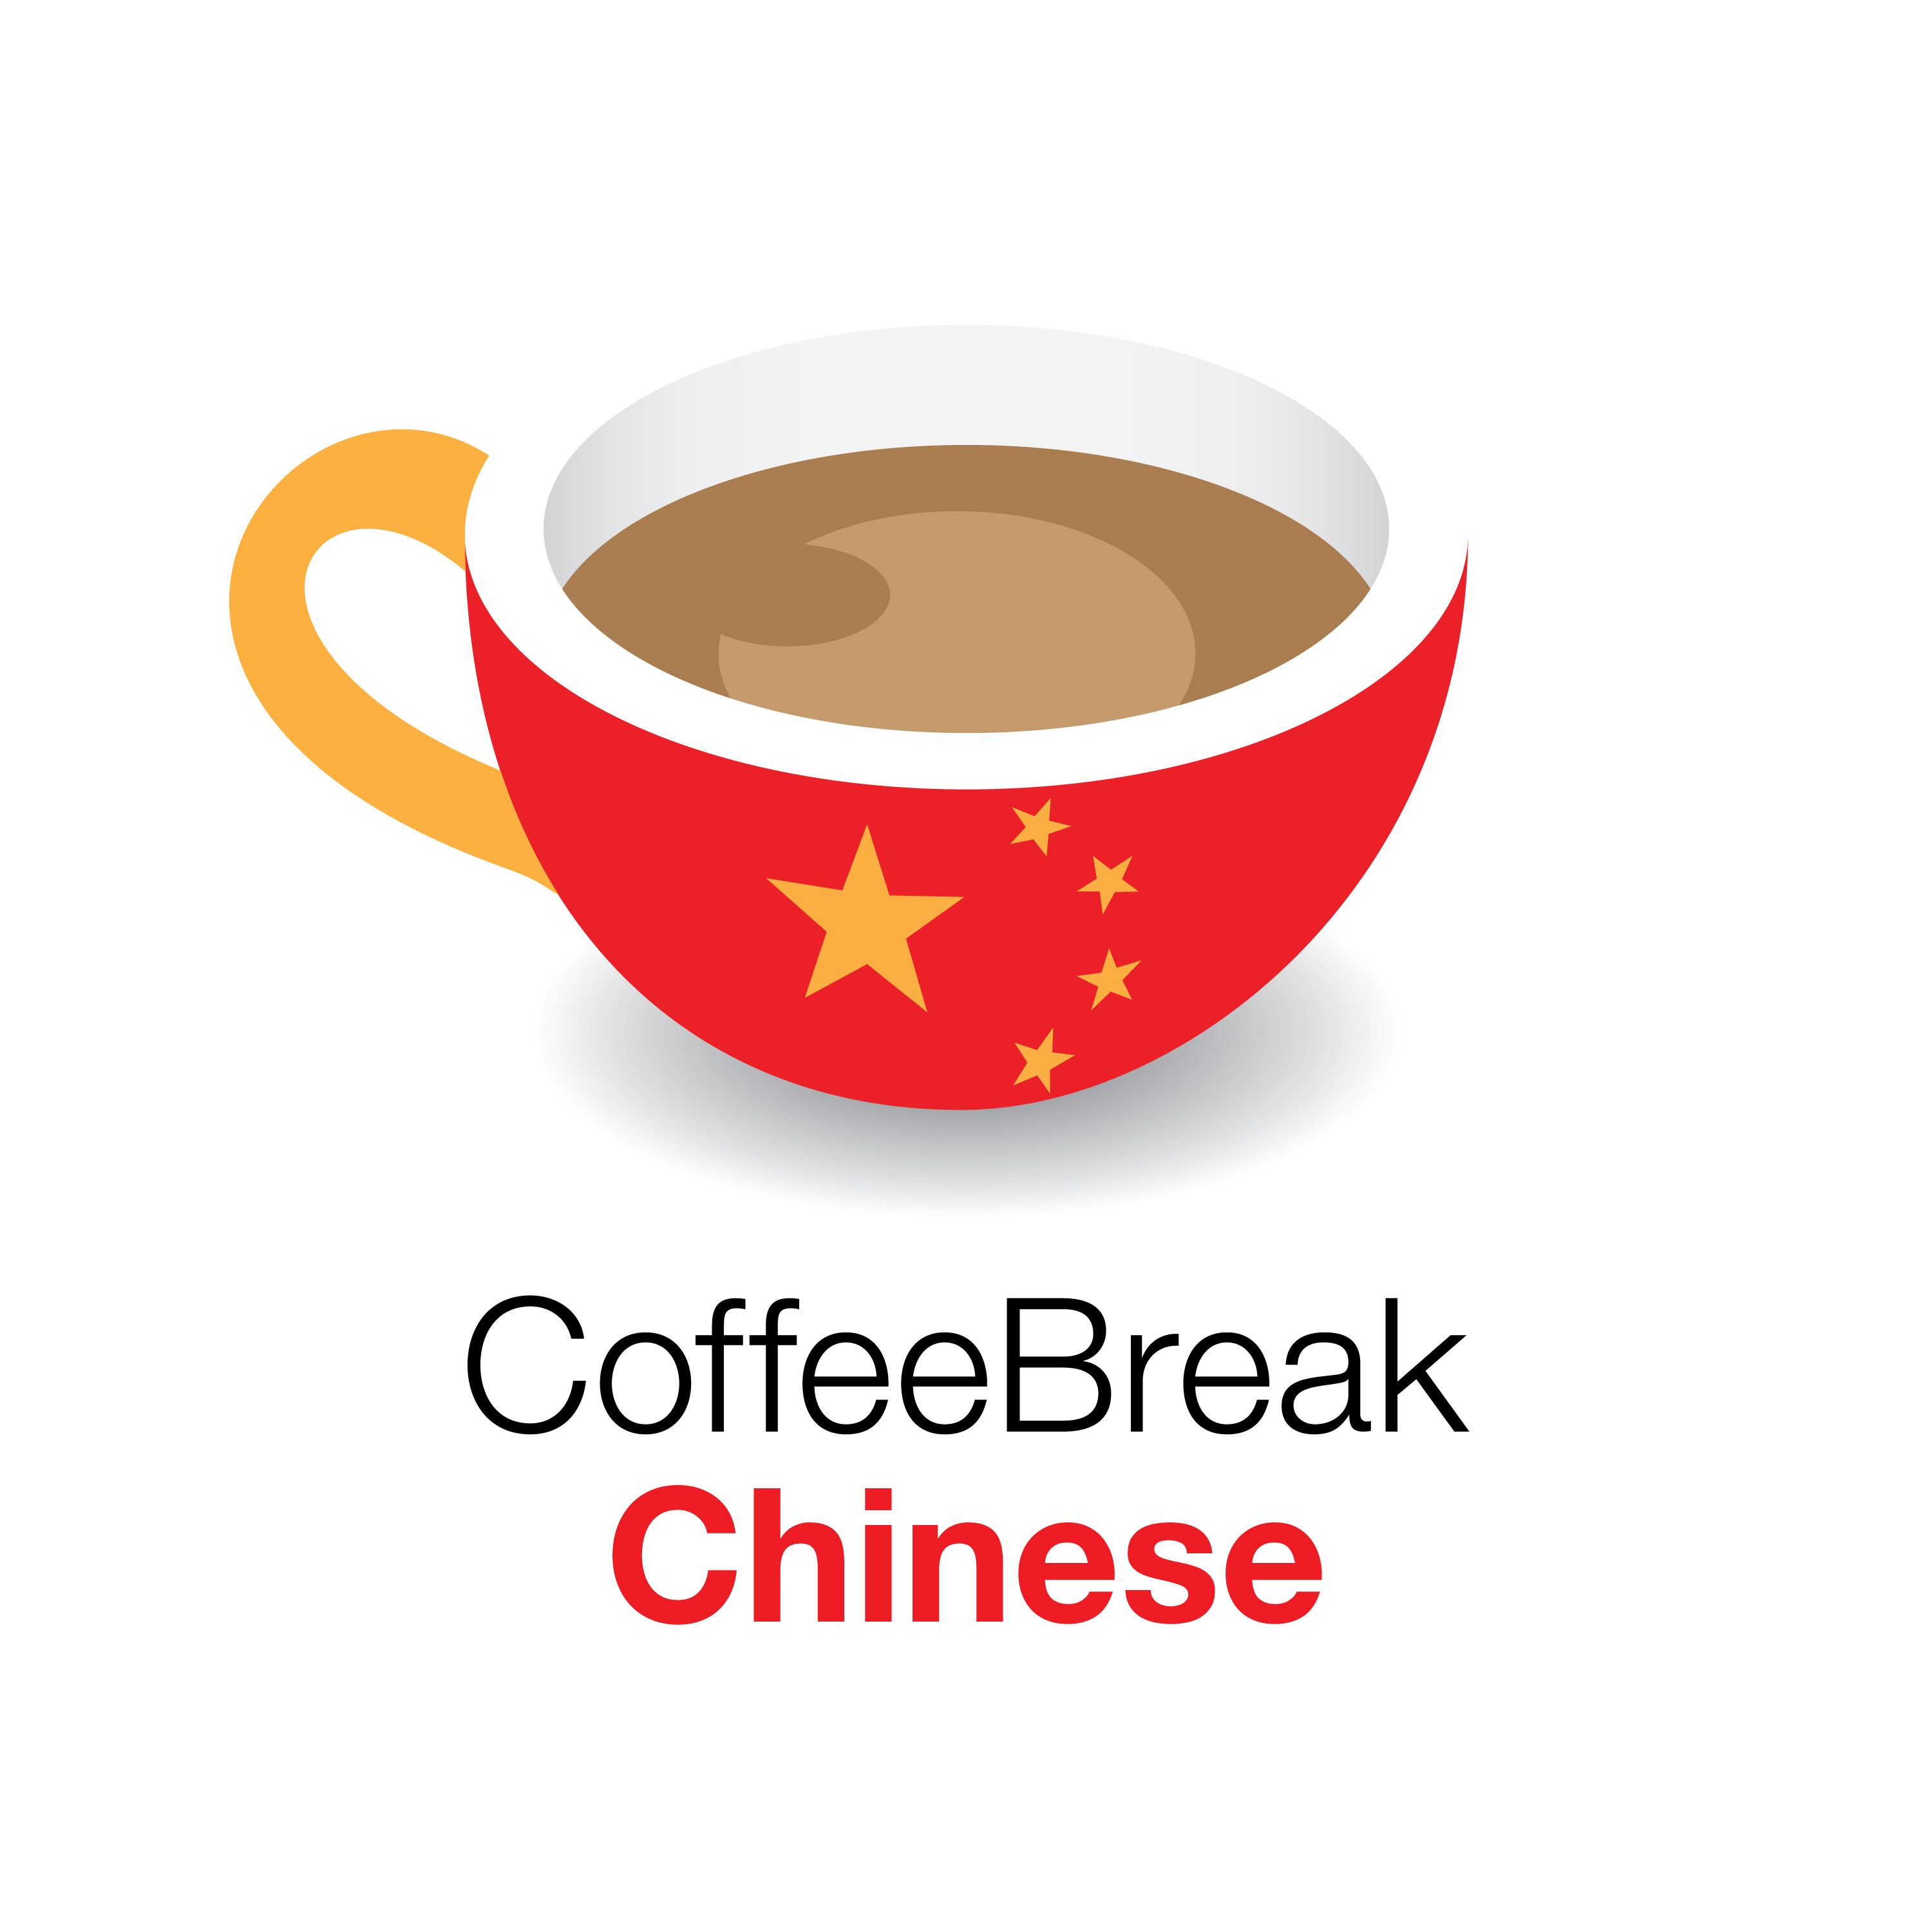 Find out more about Coffee Break Chinese